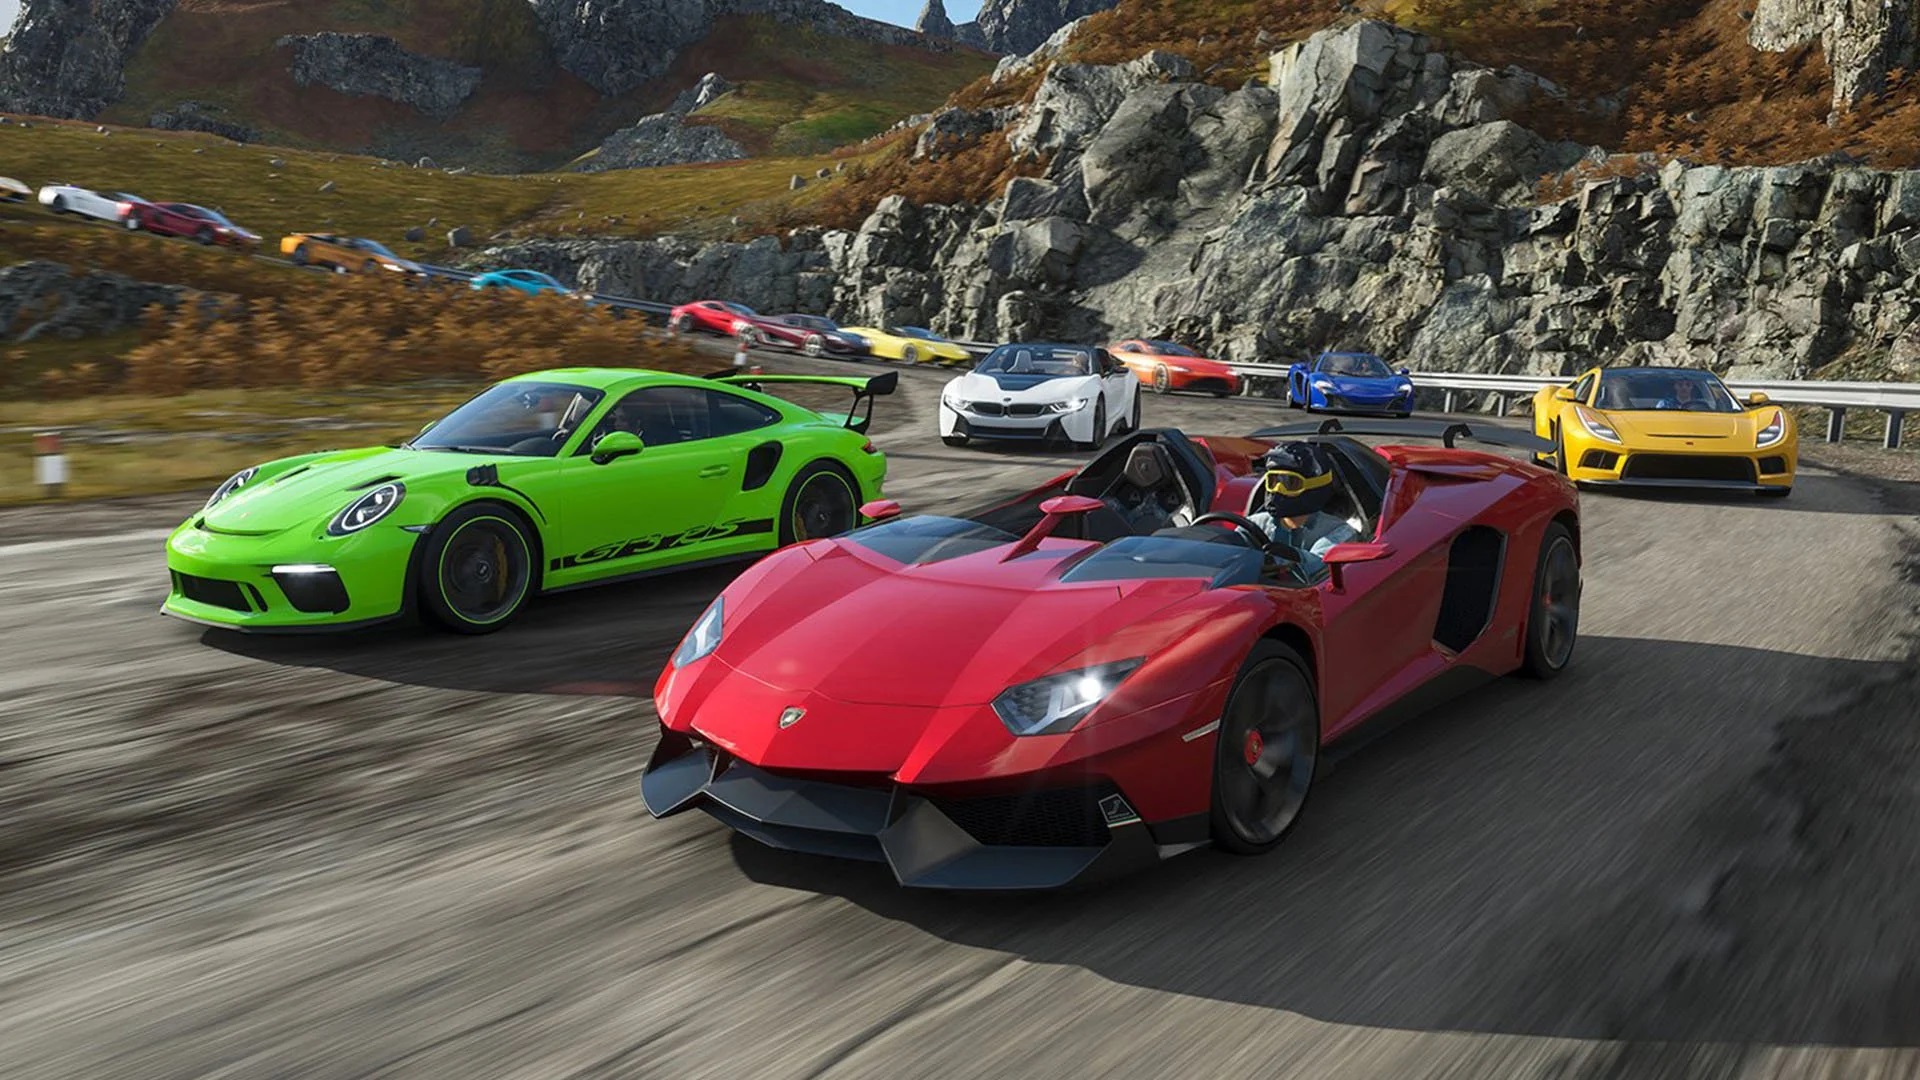 Car racing in Forza Motorsport, the most inclusive video game according to the FIVI.